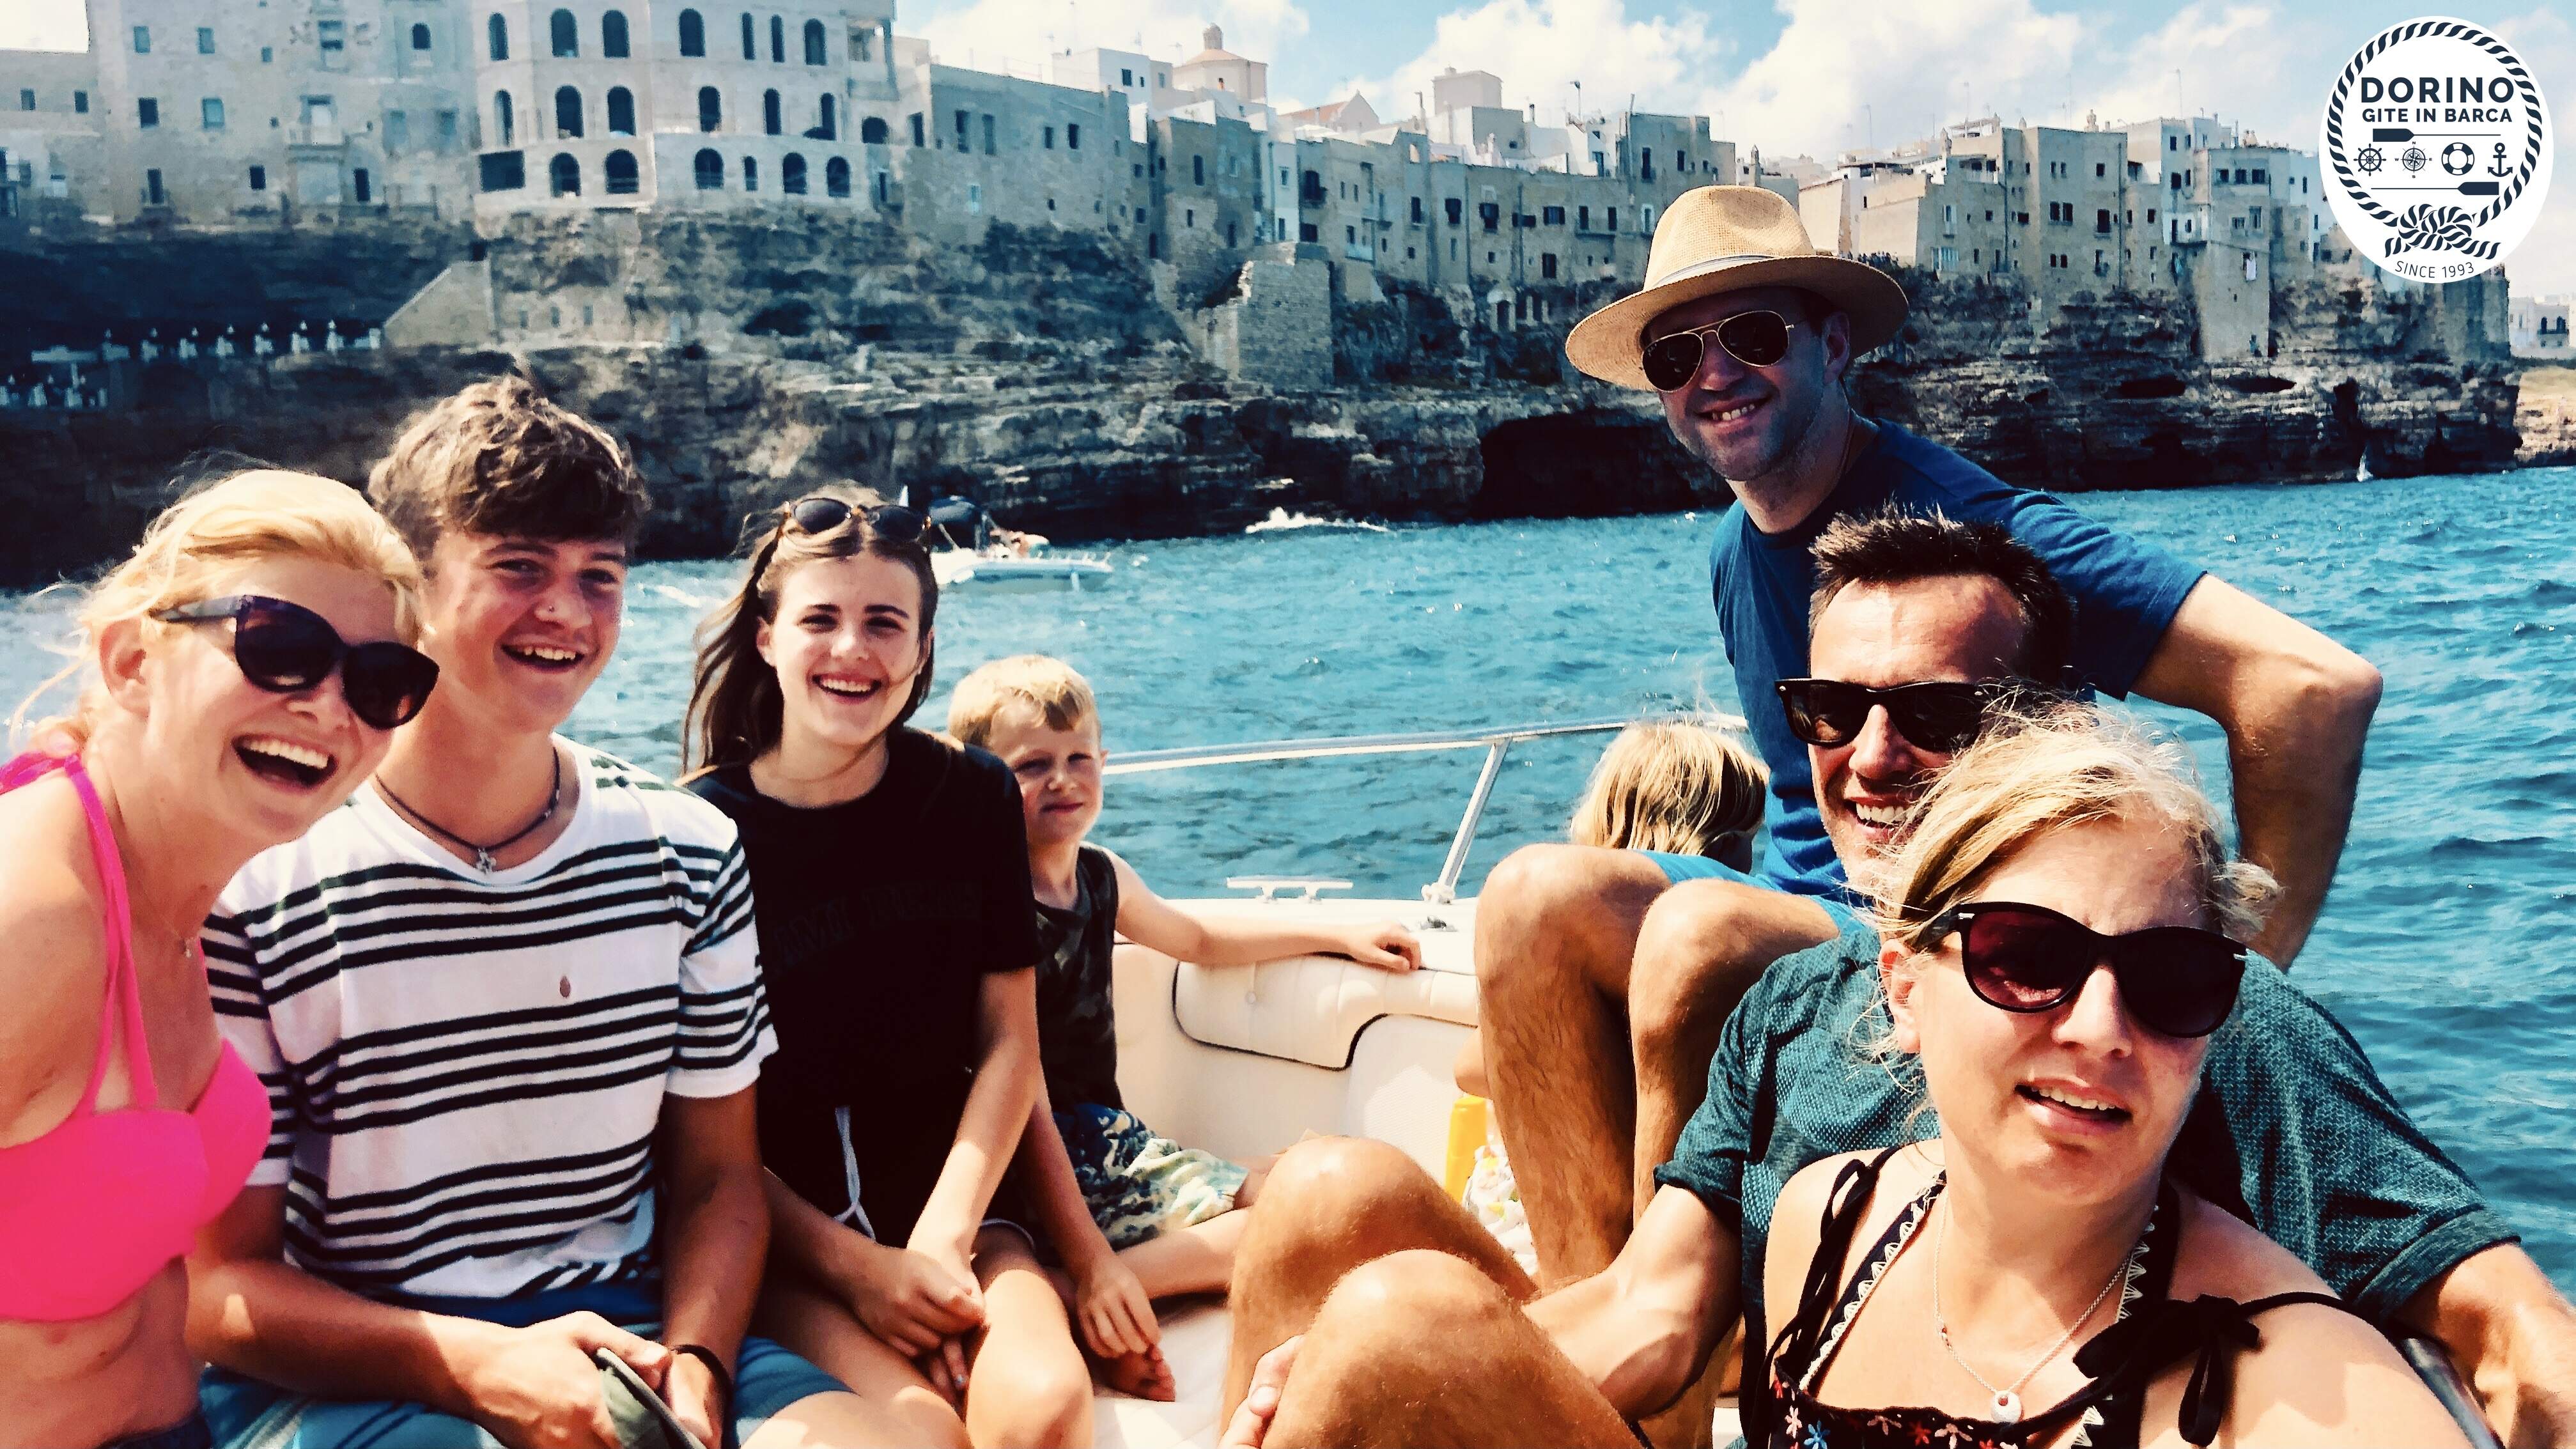 An American family on vacation in Polignano with Dorino Gite in Barca